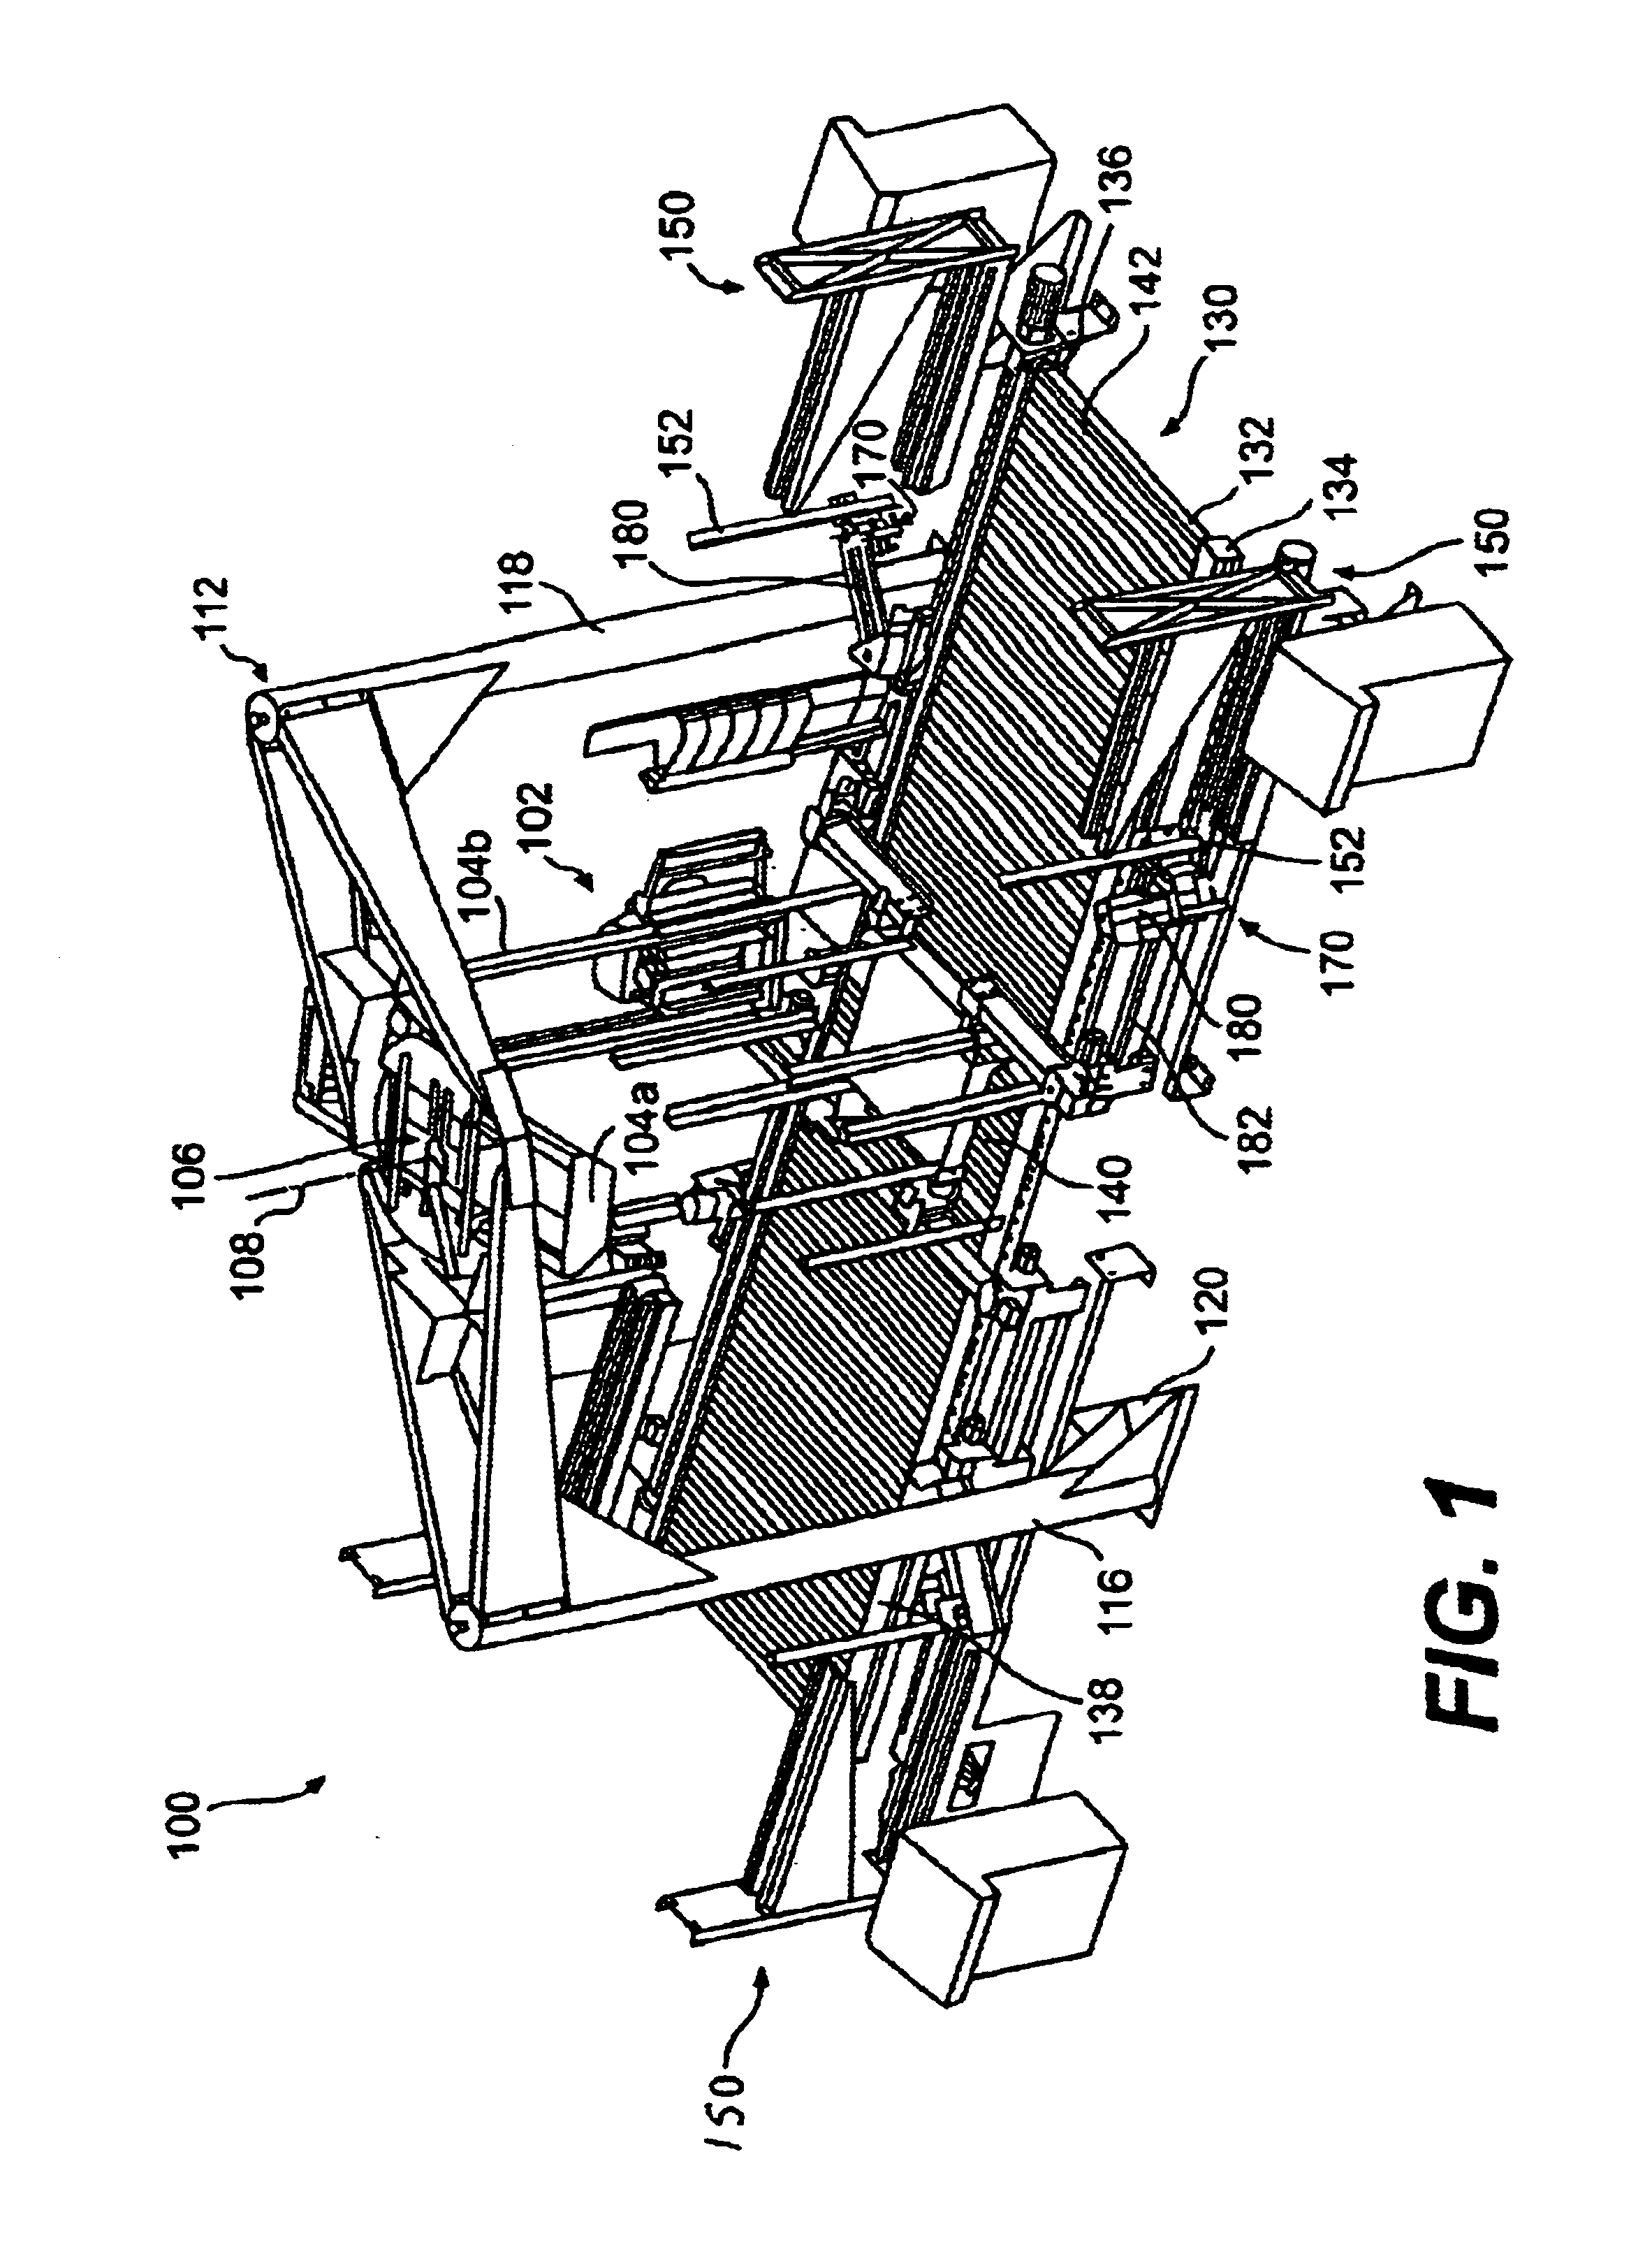 Apparatus and method for applying cornerboards to a load